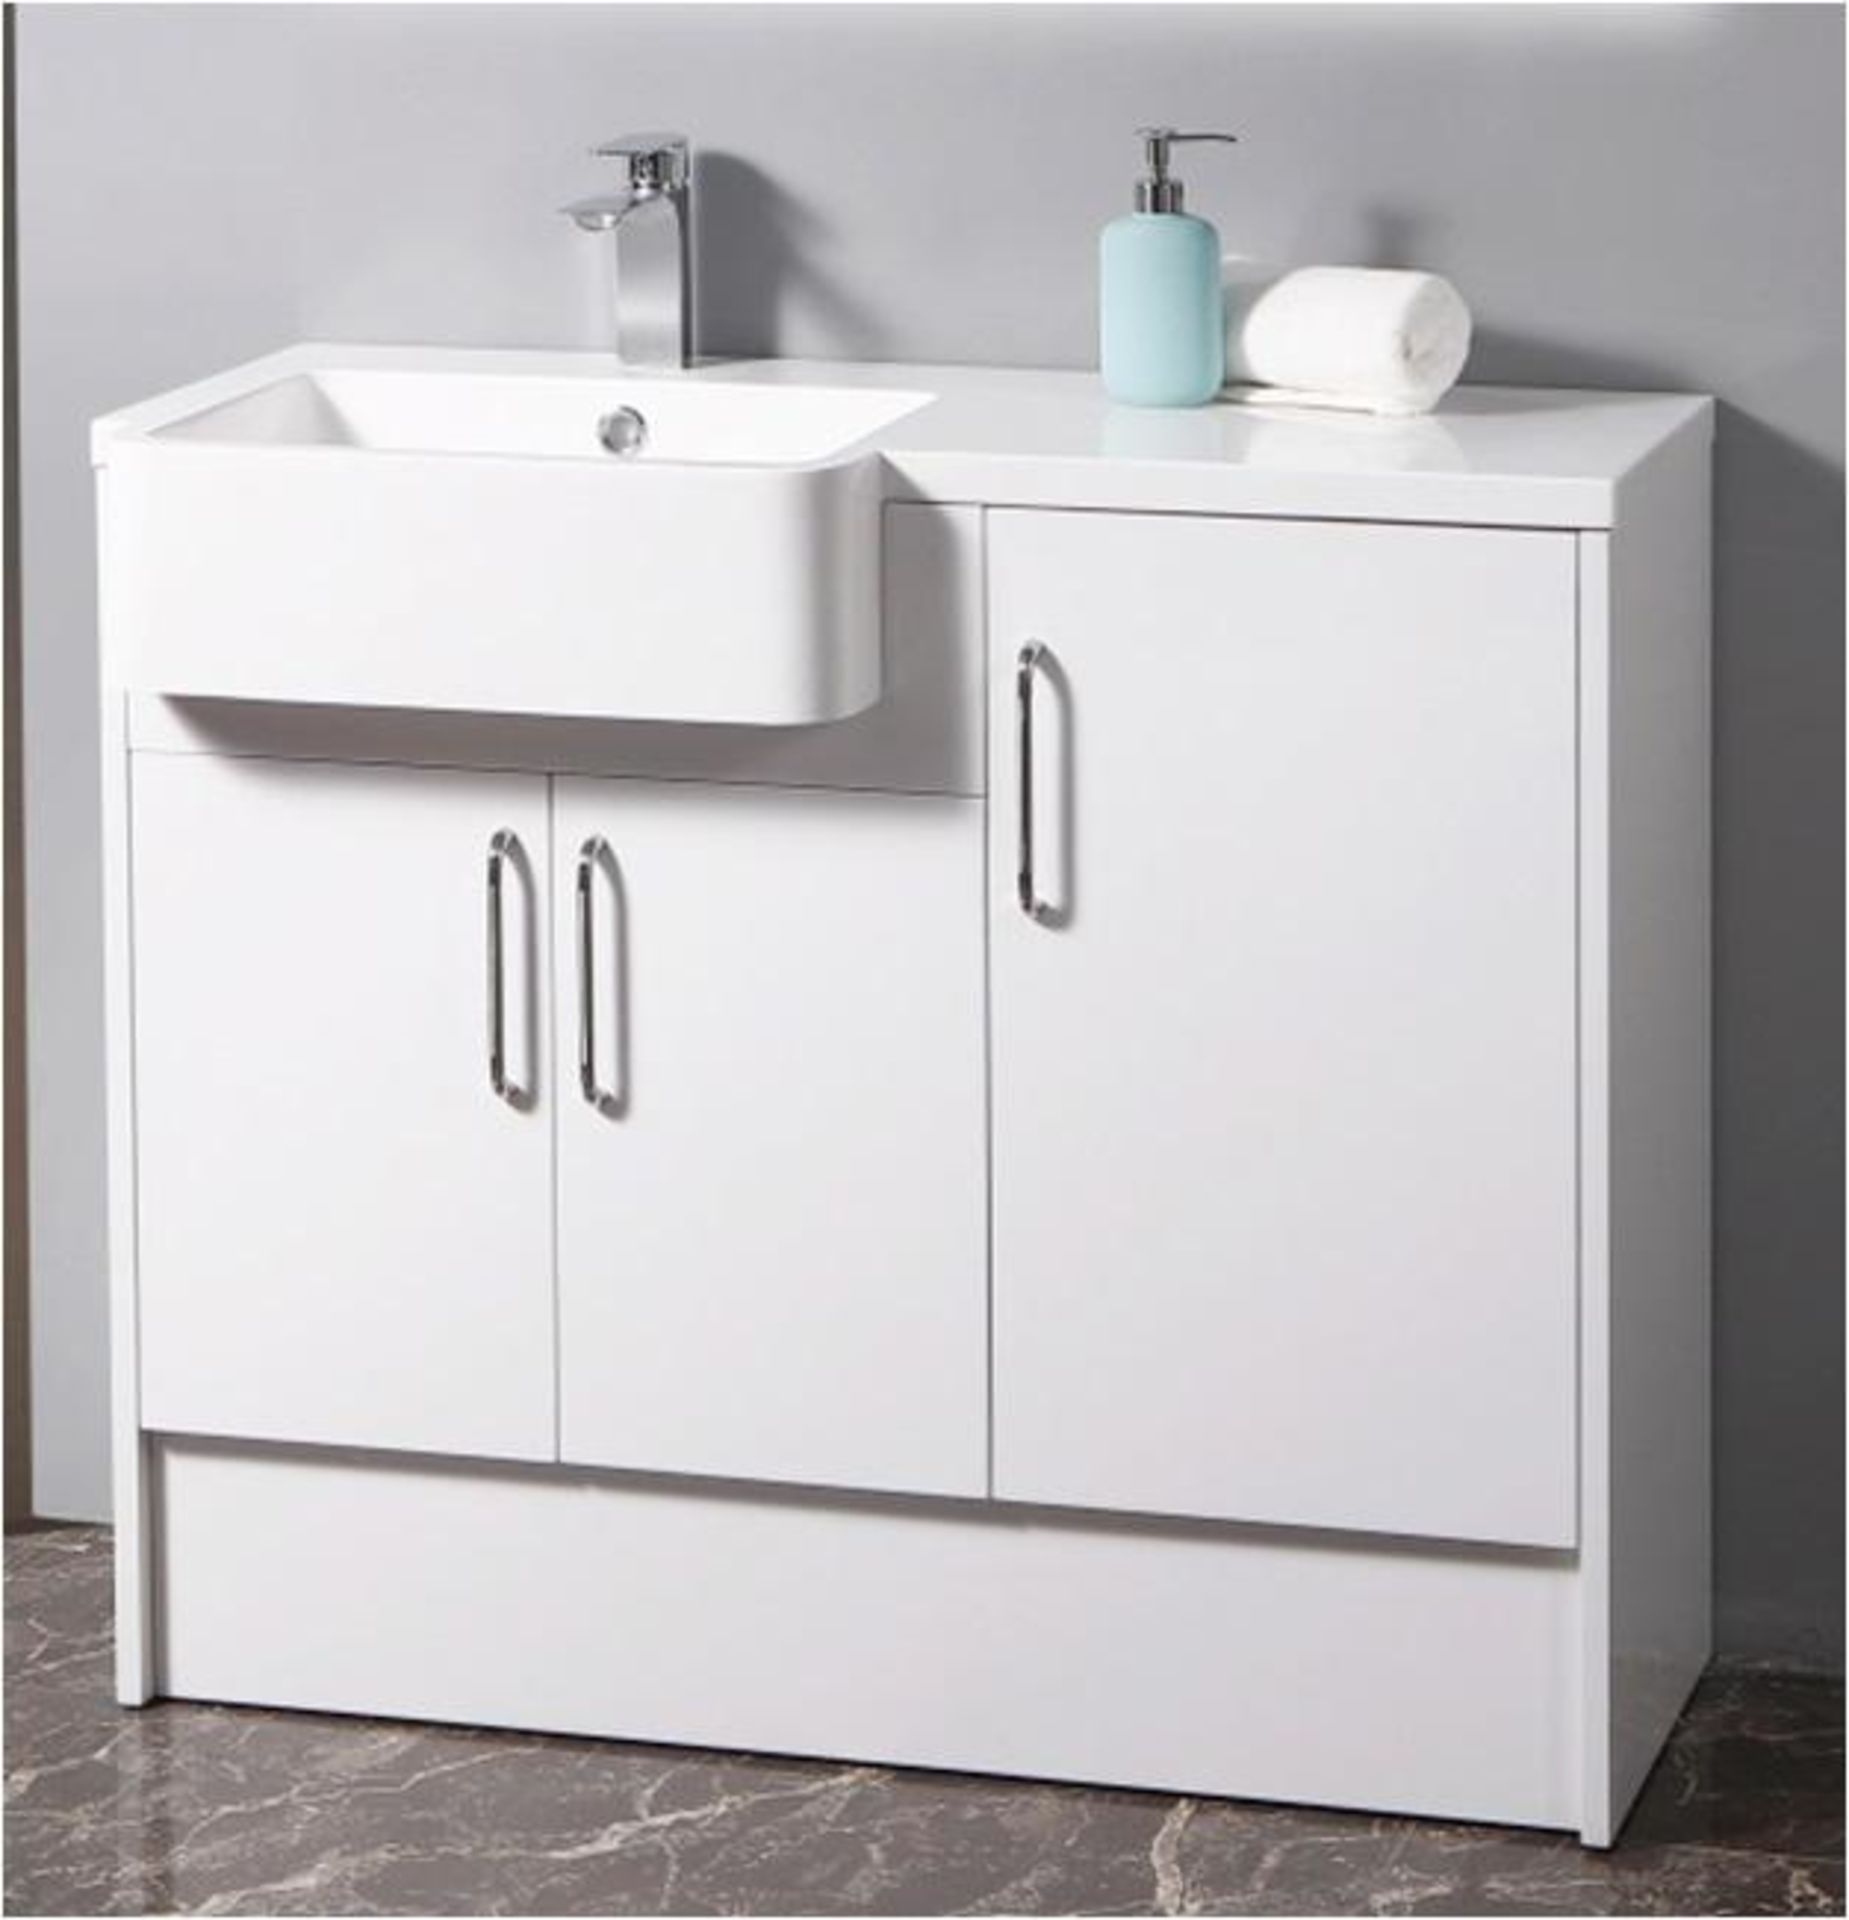 1 x High Gloss White Bathroom Vanity Unit Featuring A Gelcoat Coated Basin And Soft Close Doors - Di - Bild 2 aus 2